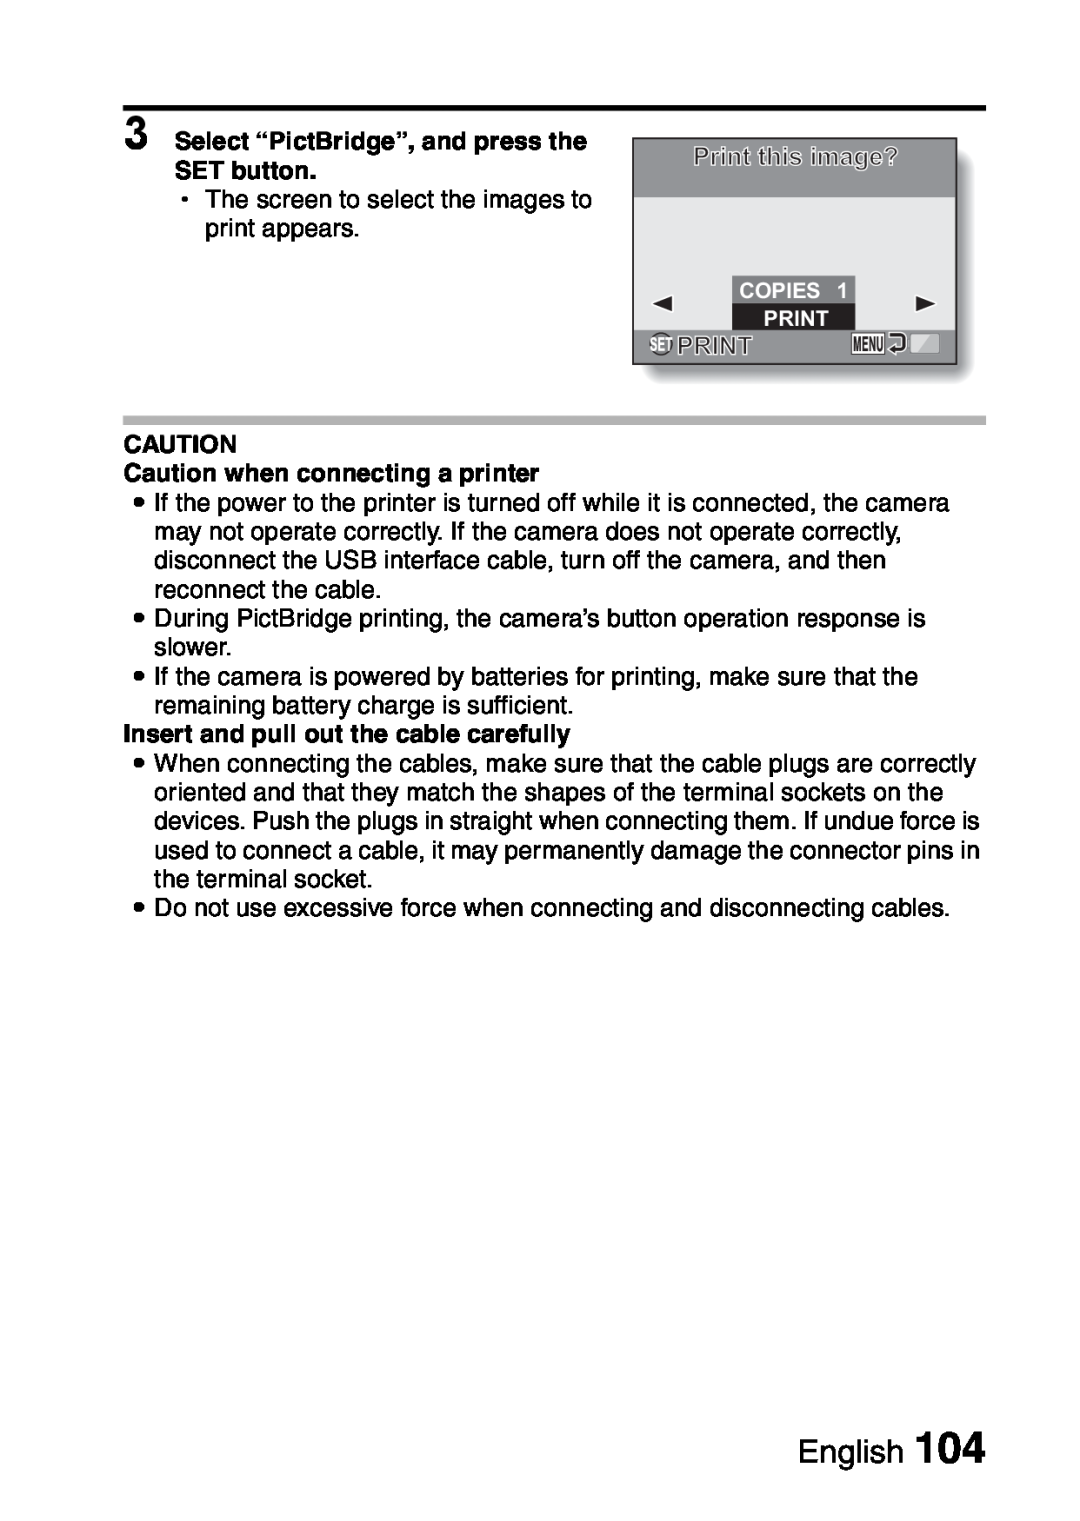 Sanyo VPC-S60 Select “PictBridge”, and press the SET button, Print this image?, Caution when connecting a printer, English 